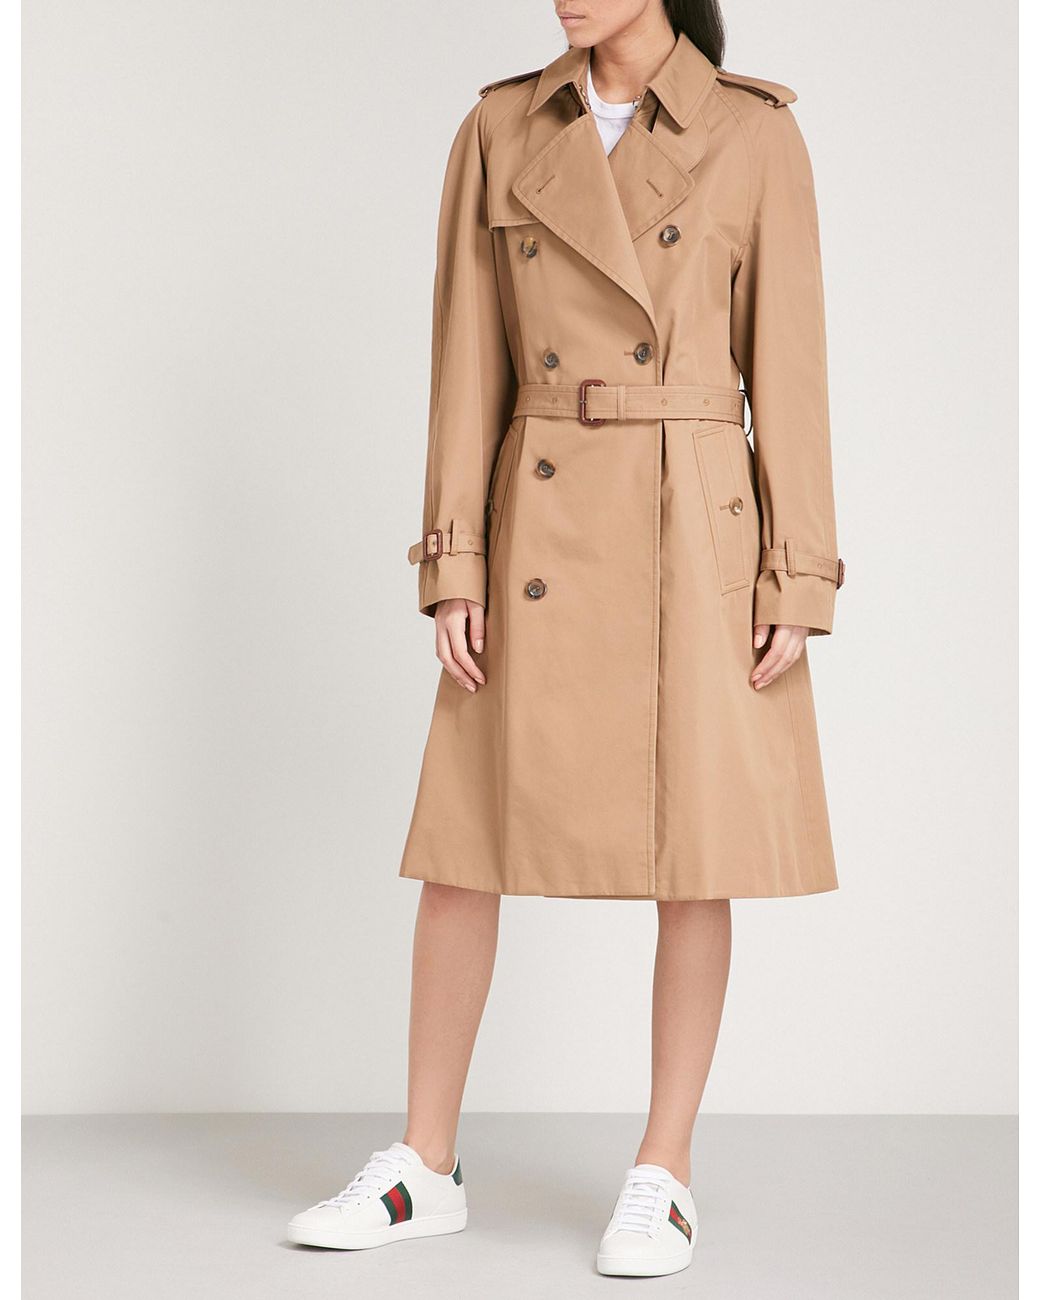 Gucci Cat-embroidered Cotton-blend Trench Coat in Natural | Lyst